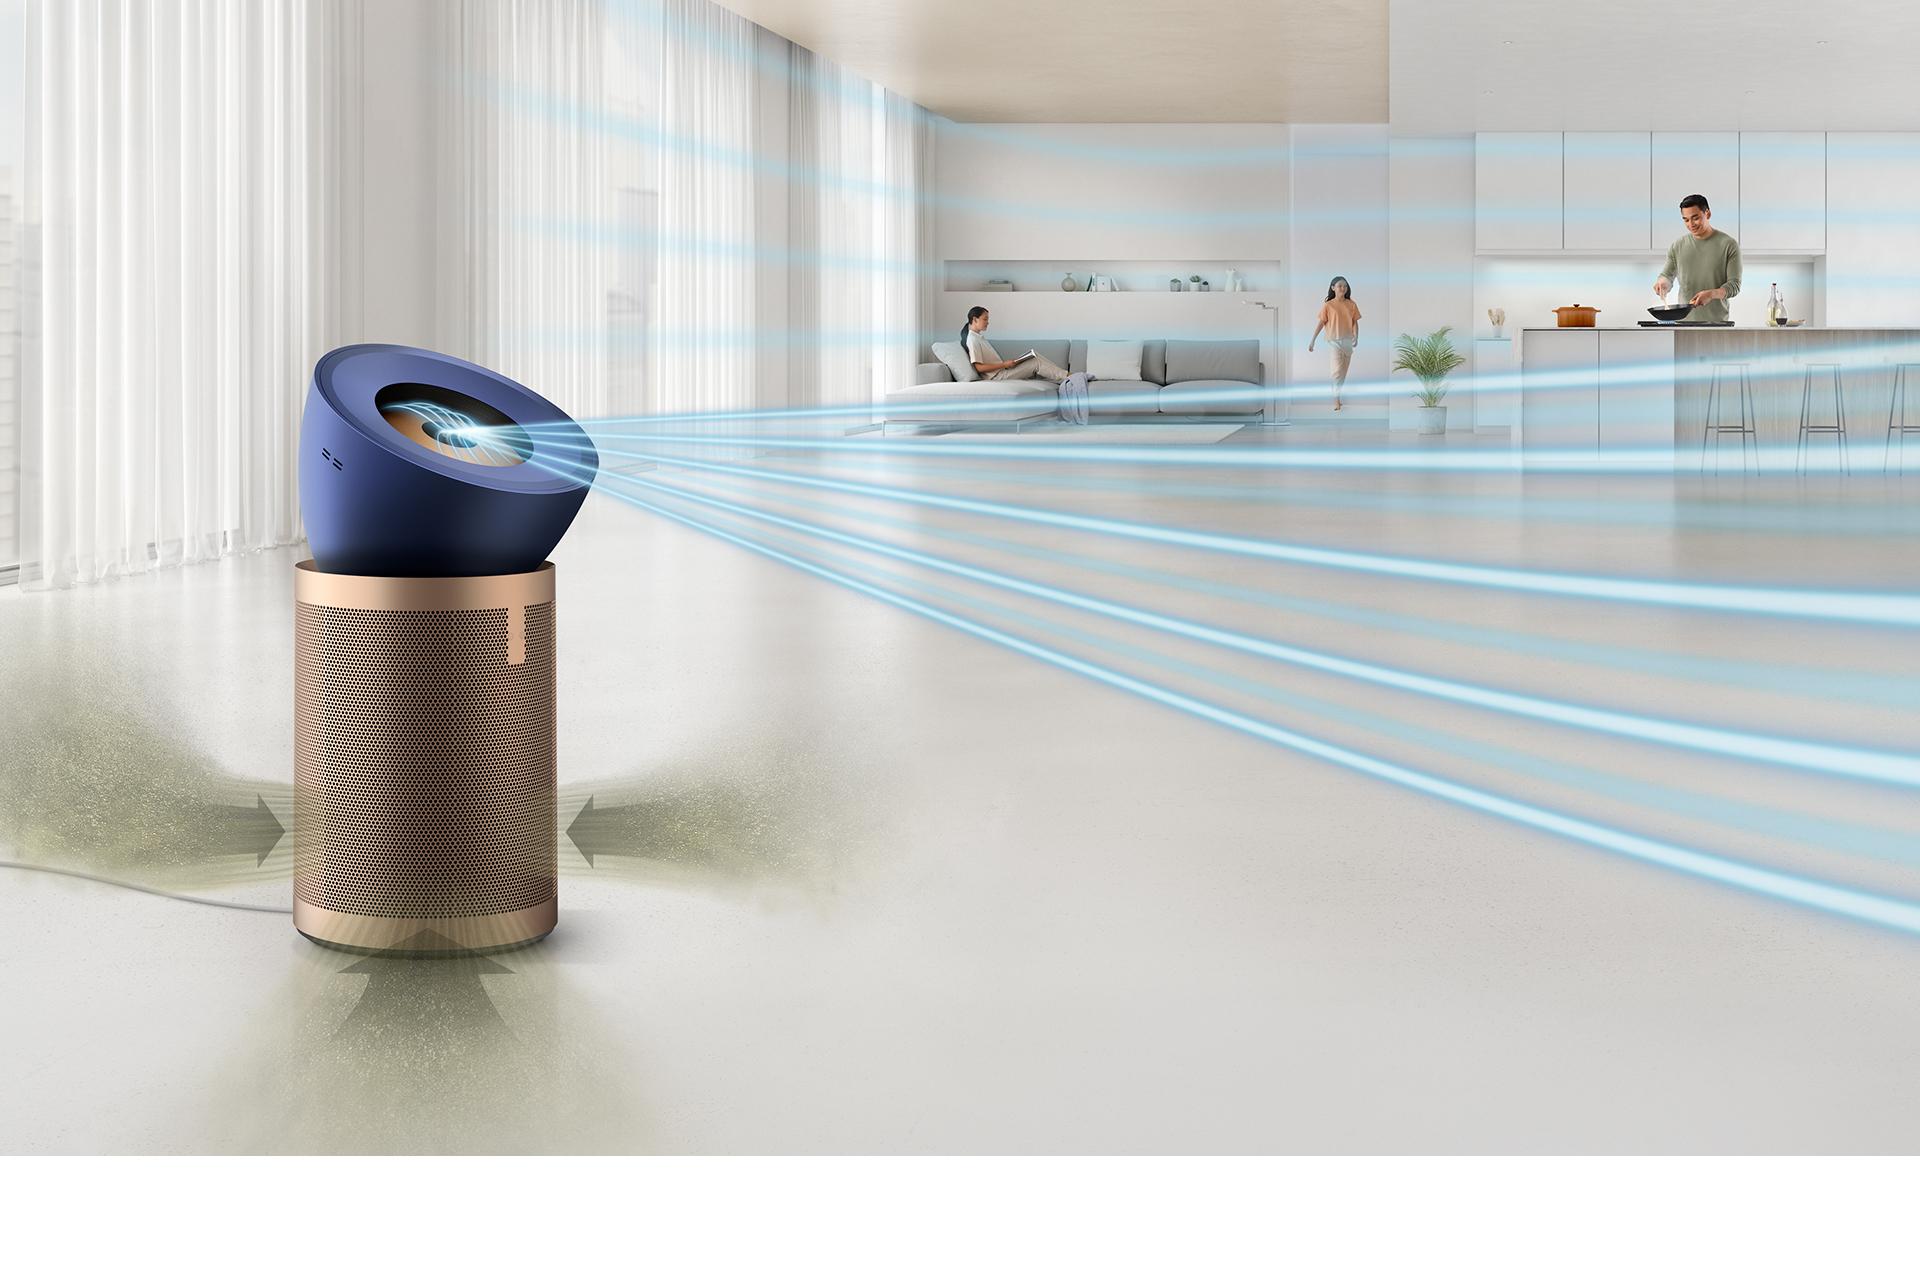 Dyson Purifier BP04 (Satin dark blue and gold) in a front room with three people in the background